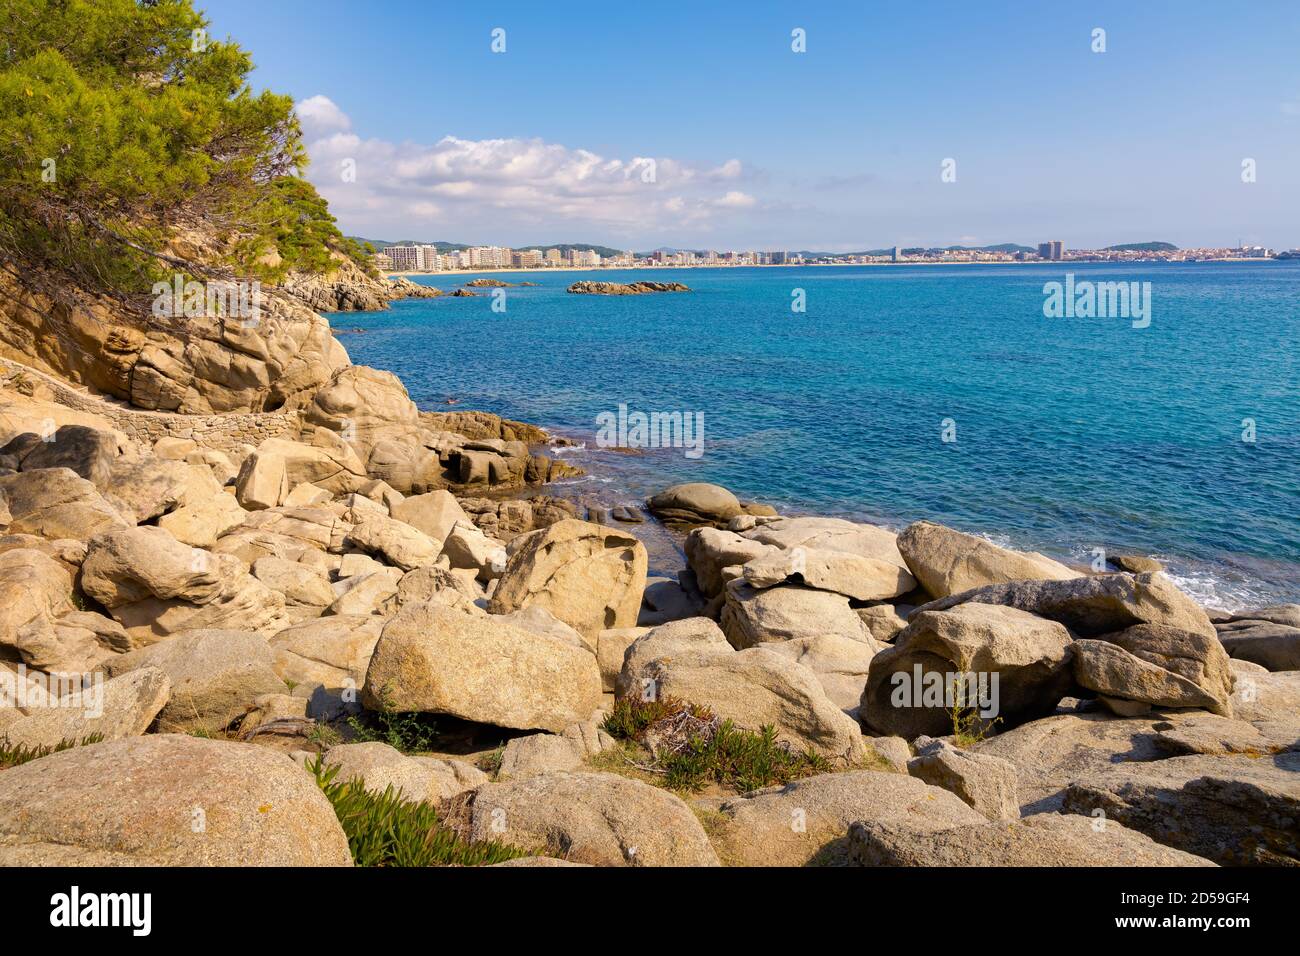 Panoramic view of the bay of Palamos seen from the tip of Rocas Planes on the Costa Brava, Catalonia, Spain Stock Photo